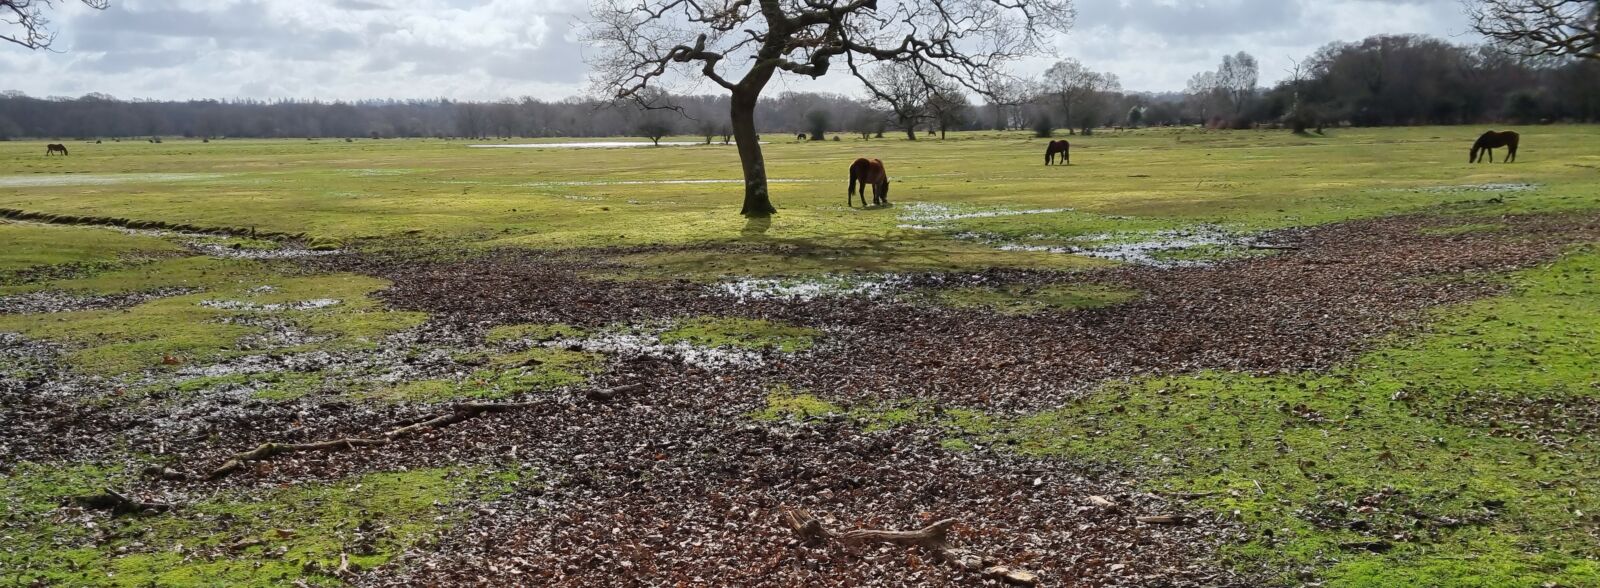 Horses and tree in a field